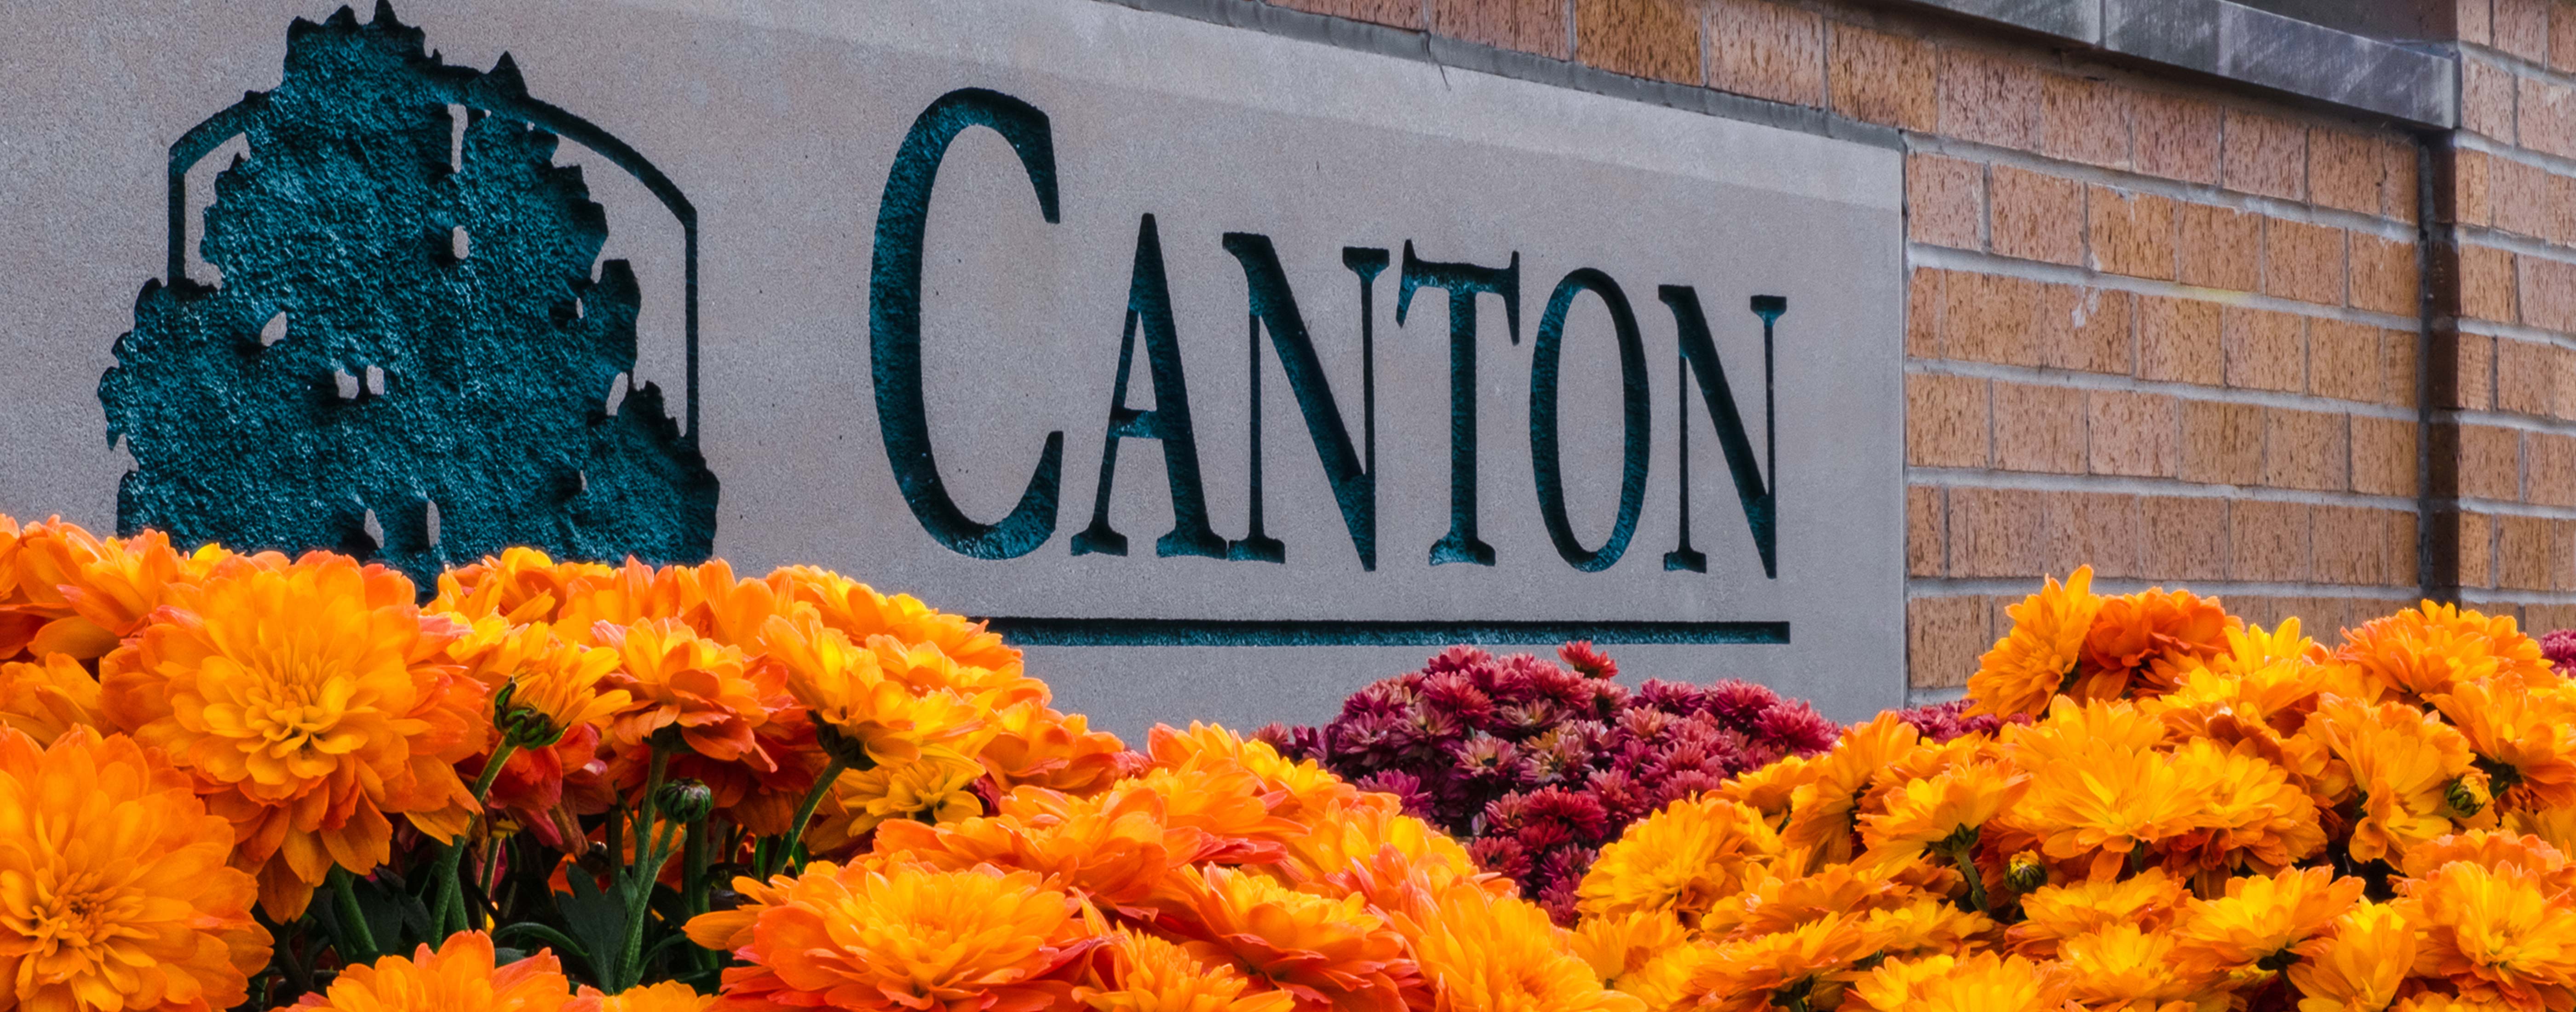 The sign welcoming you to Canton Township, Michigan.